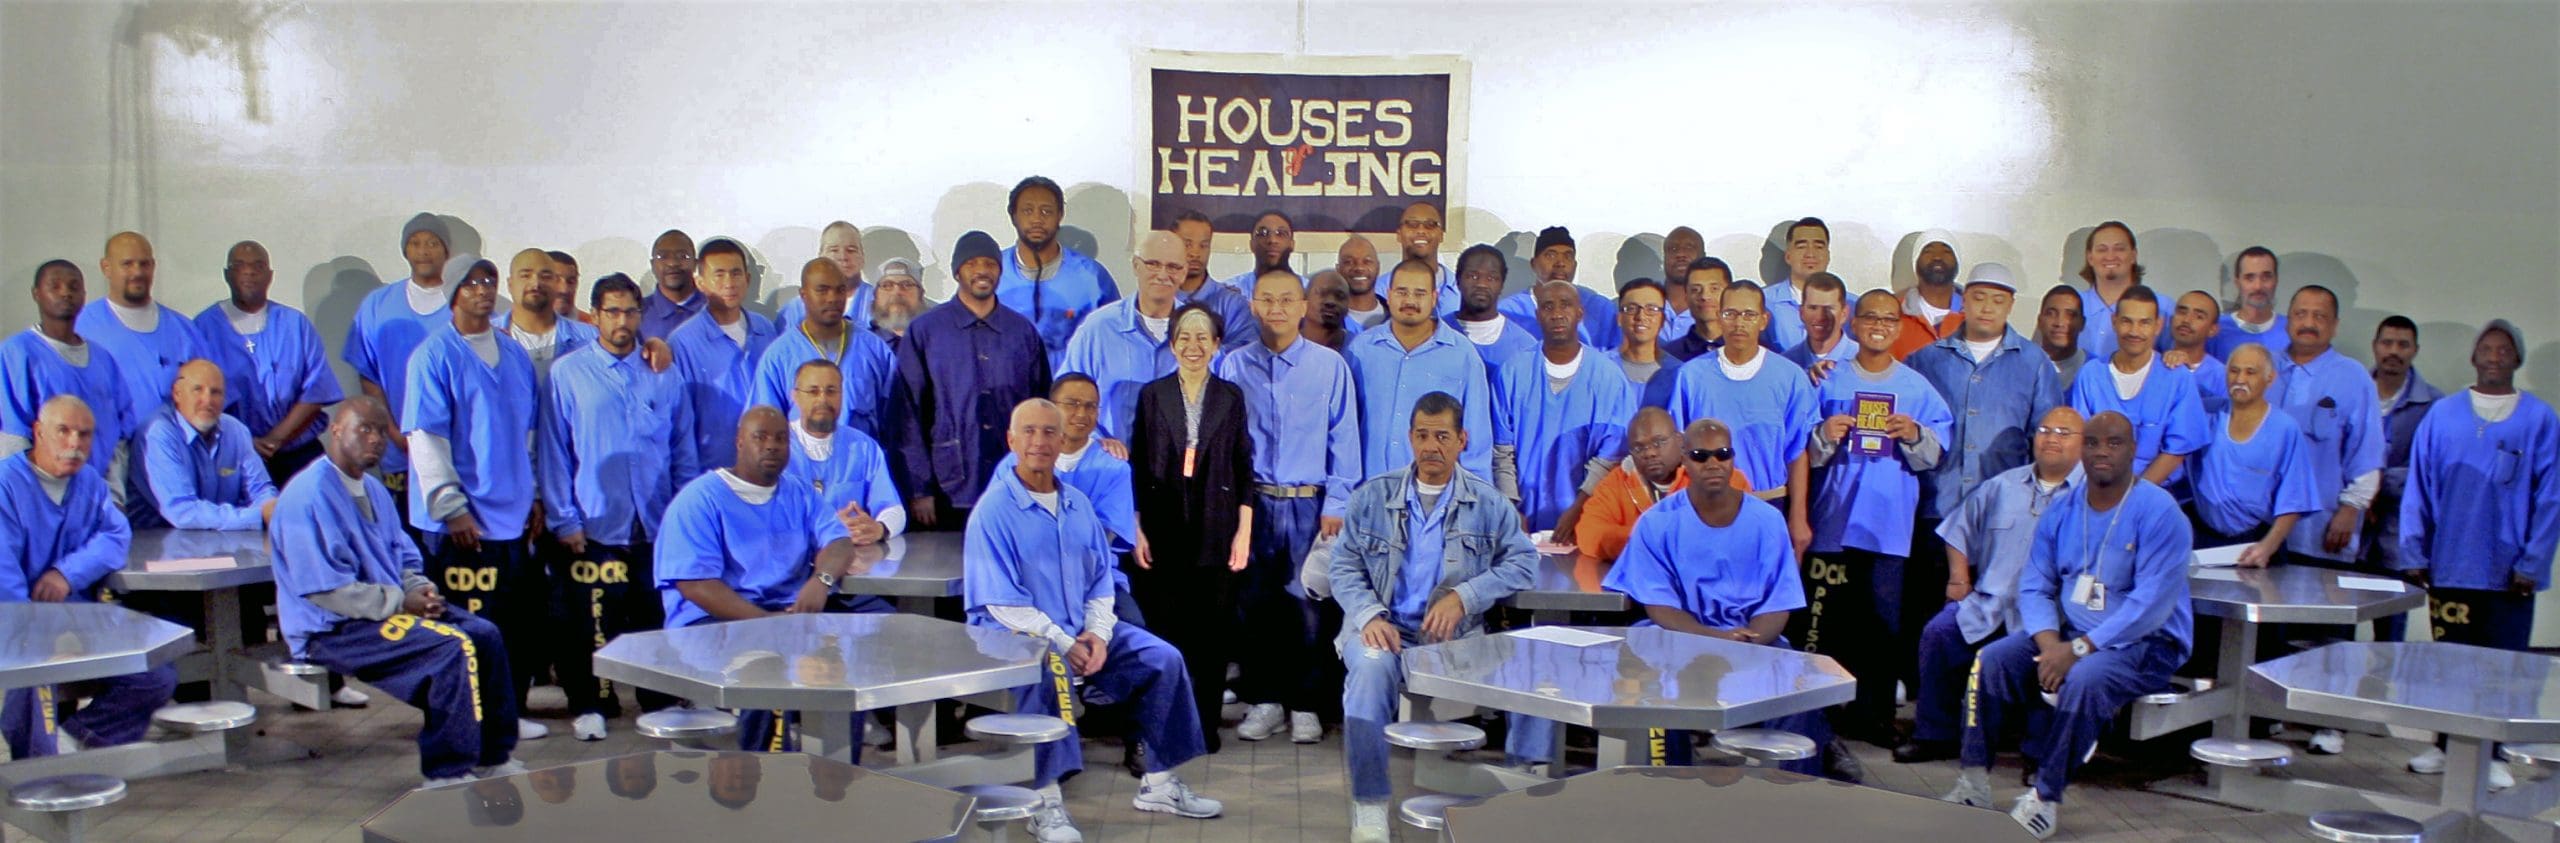 Lionheart's Founder, Robin Casarjian, with Participants of Houses of Healing at California State Prison, Lancaster